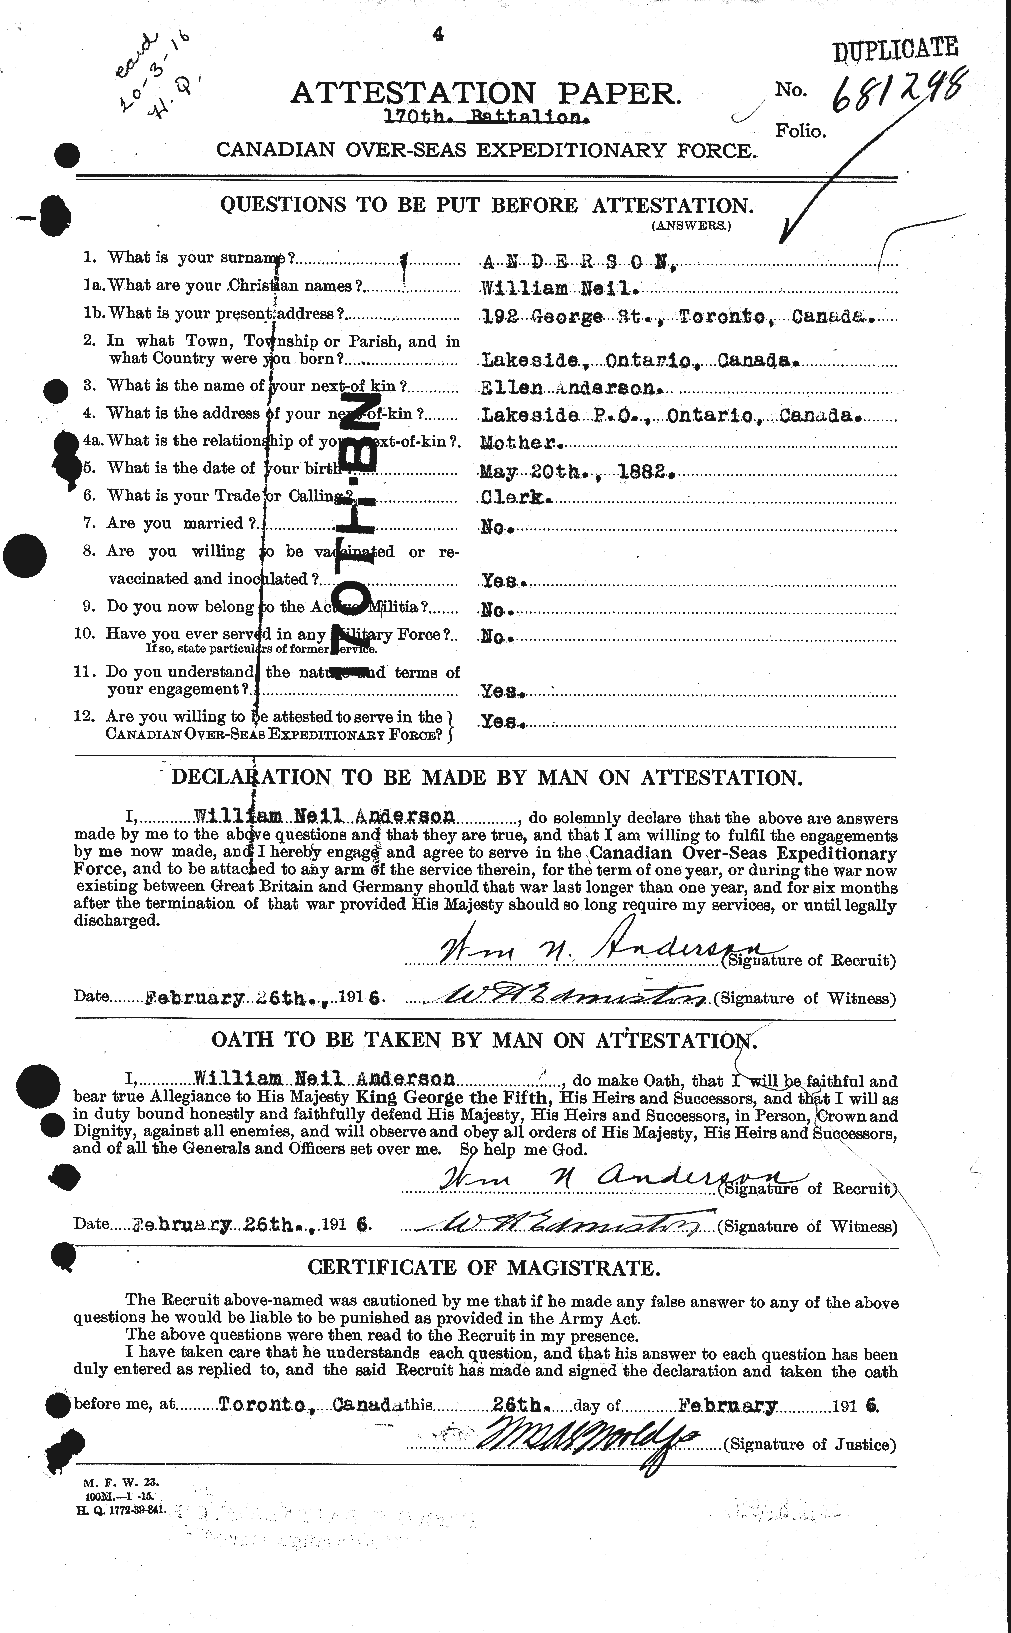 Personnel Records of the First World War - CEF 210680a